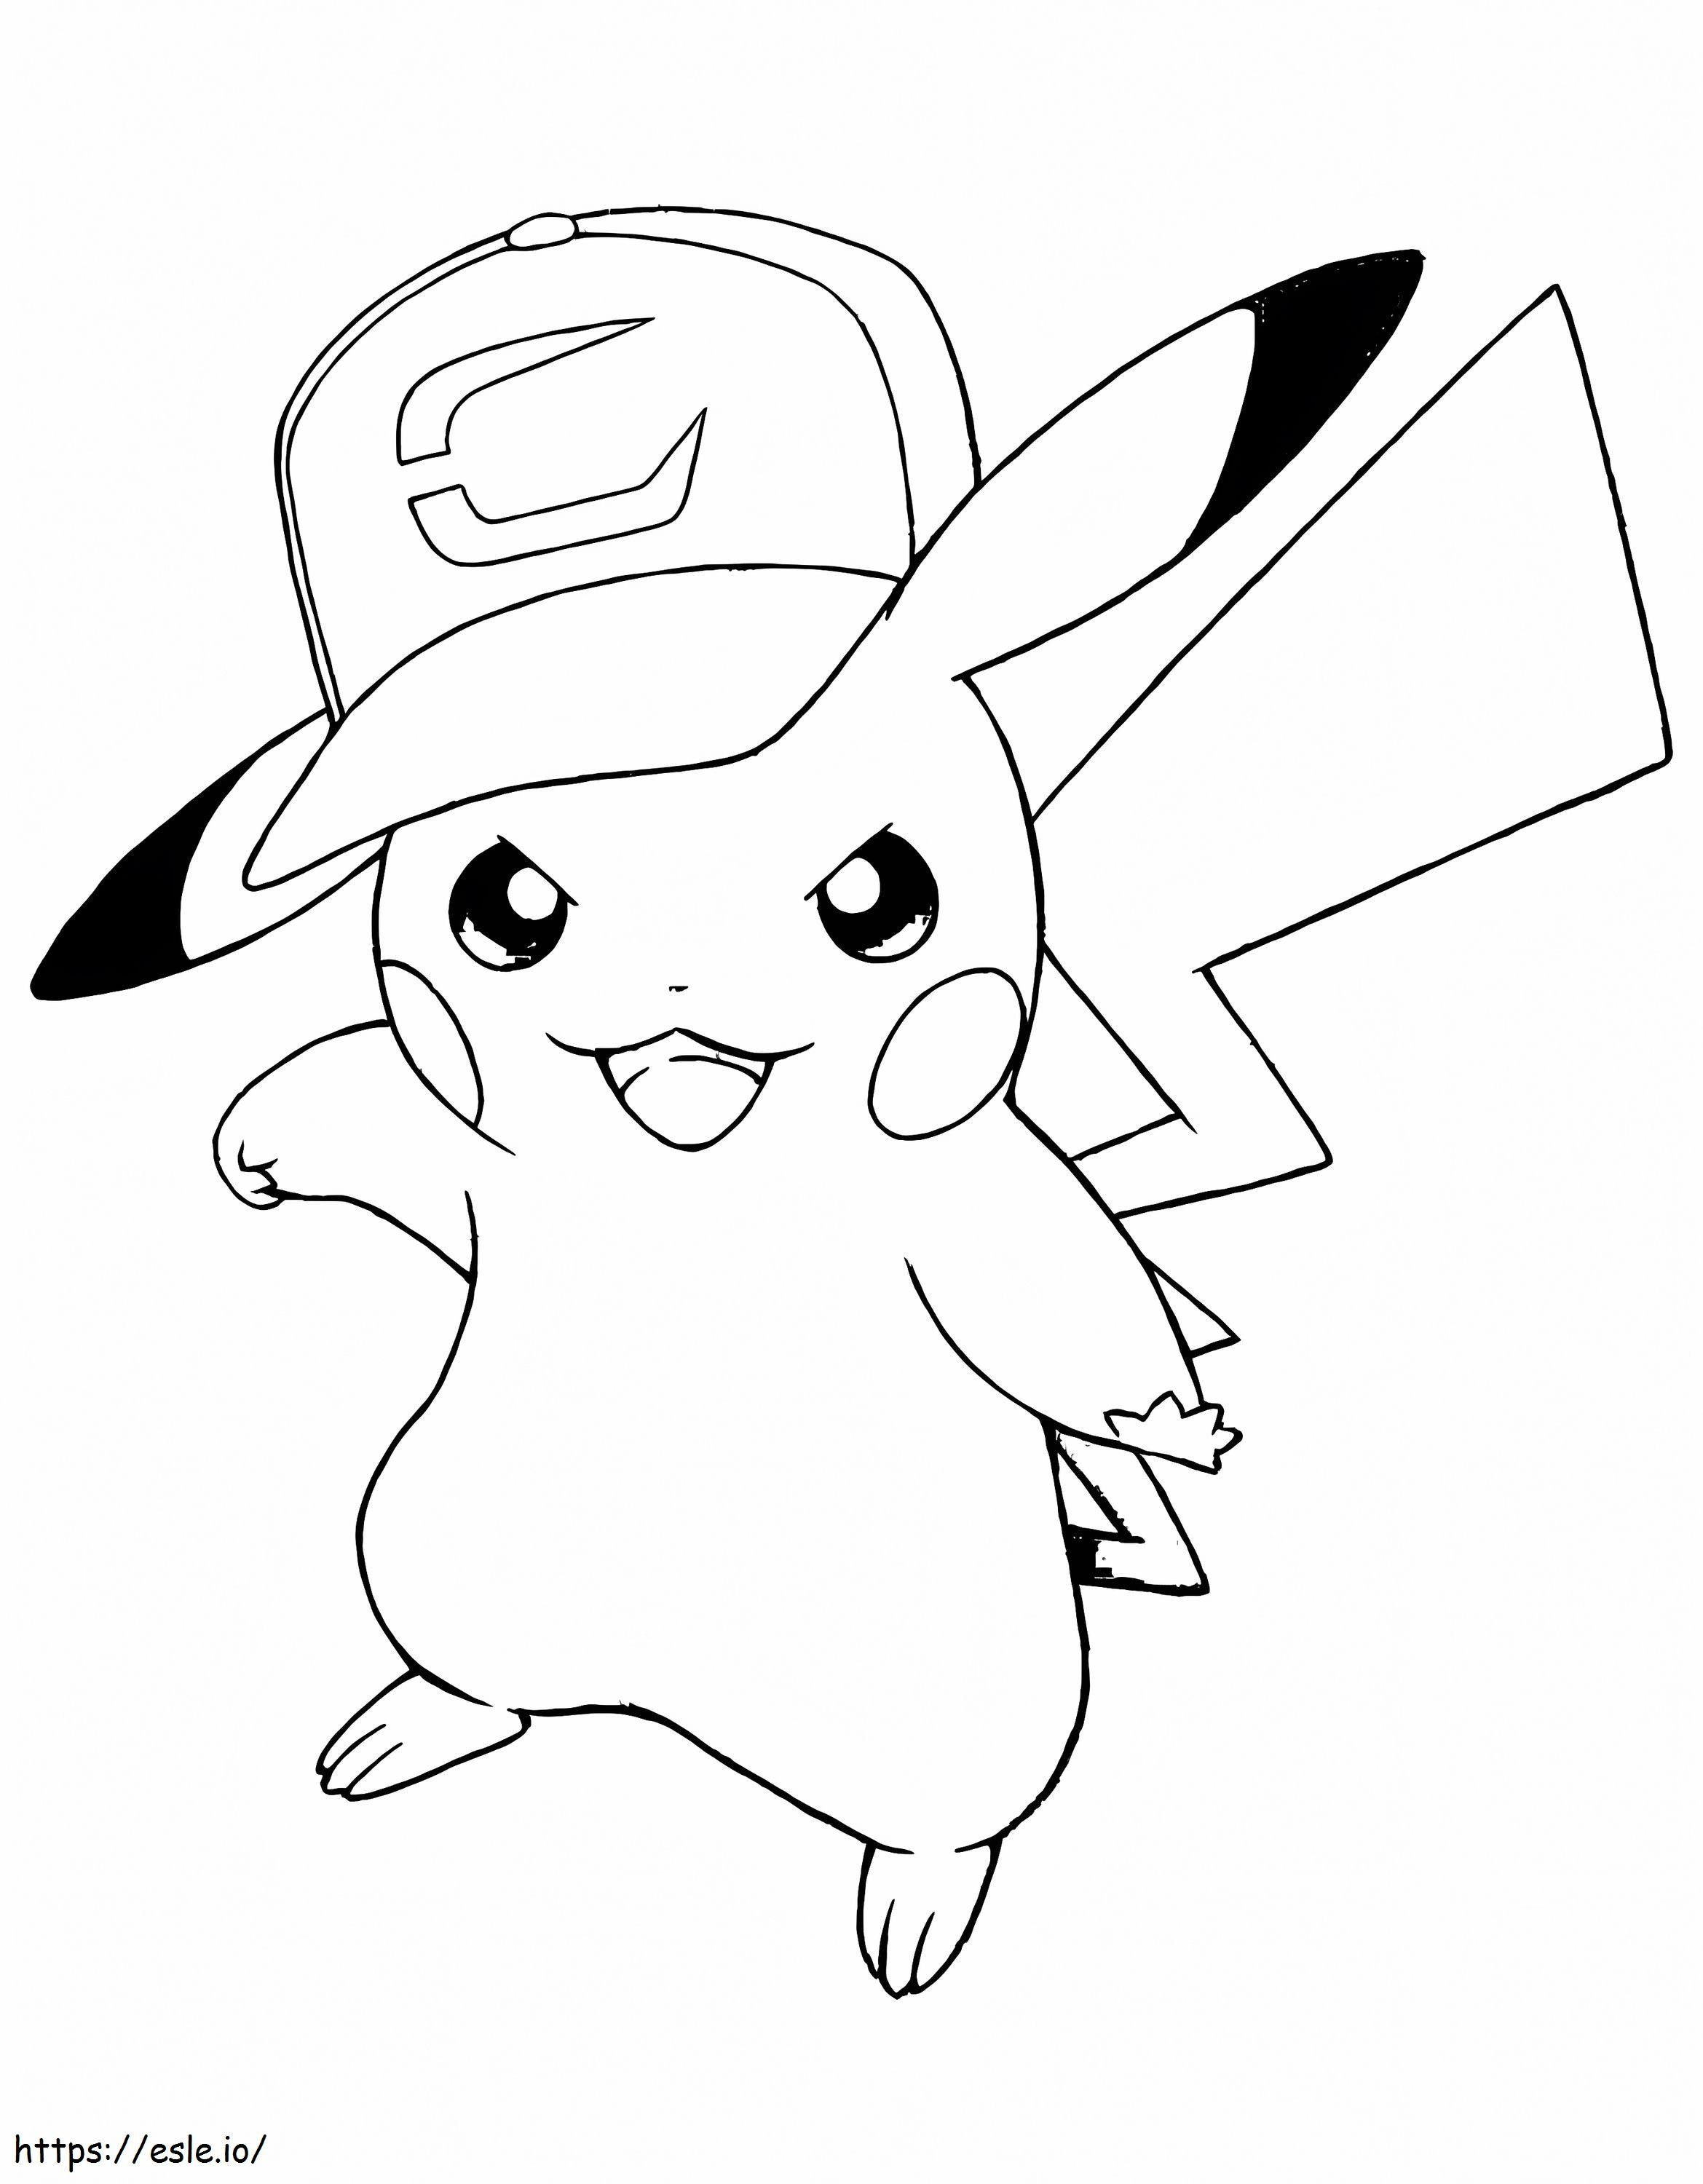 Amazing Pikachu coloring page